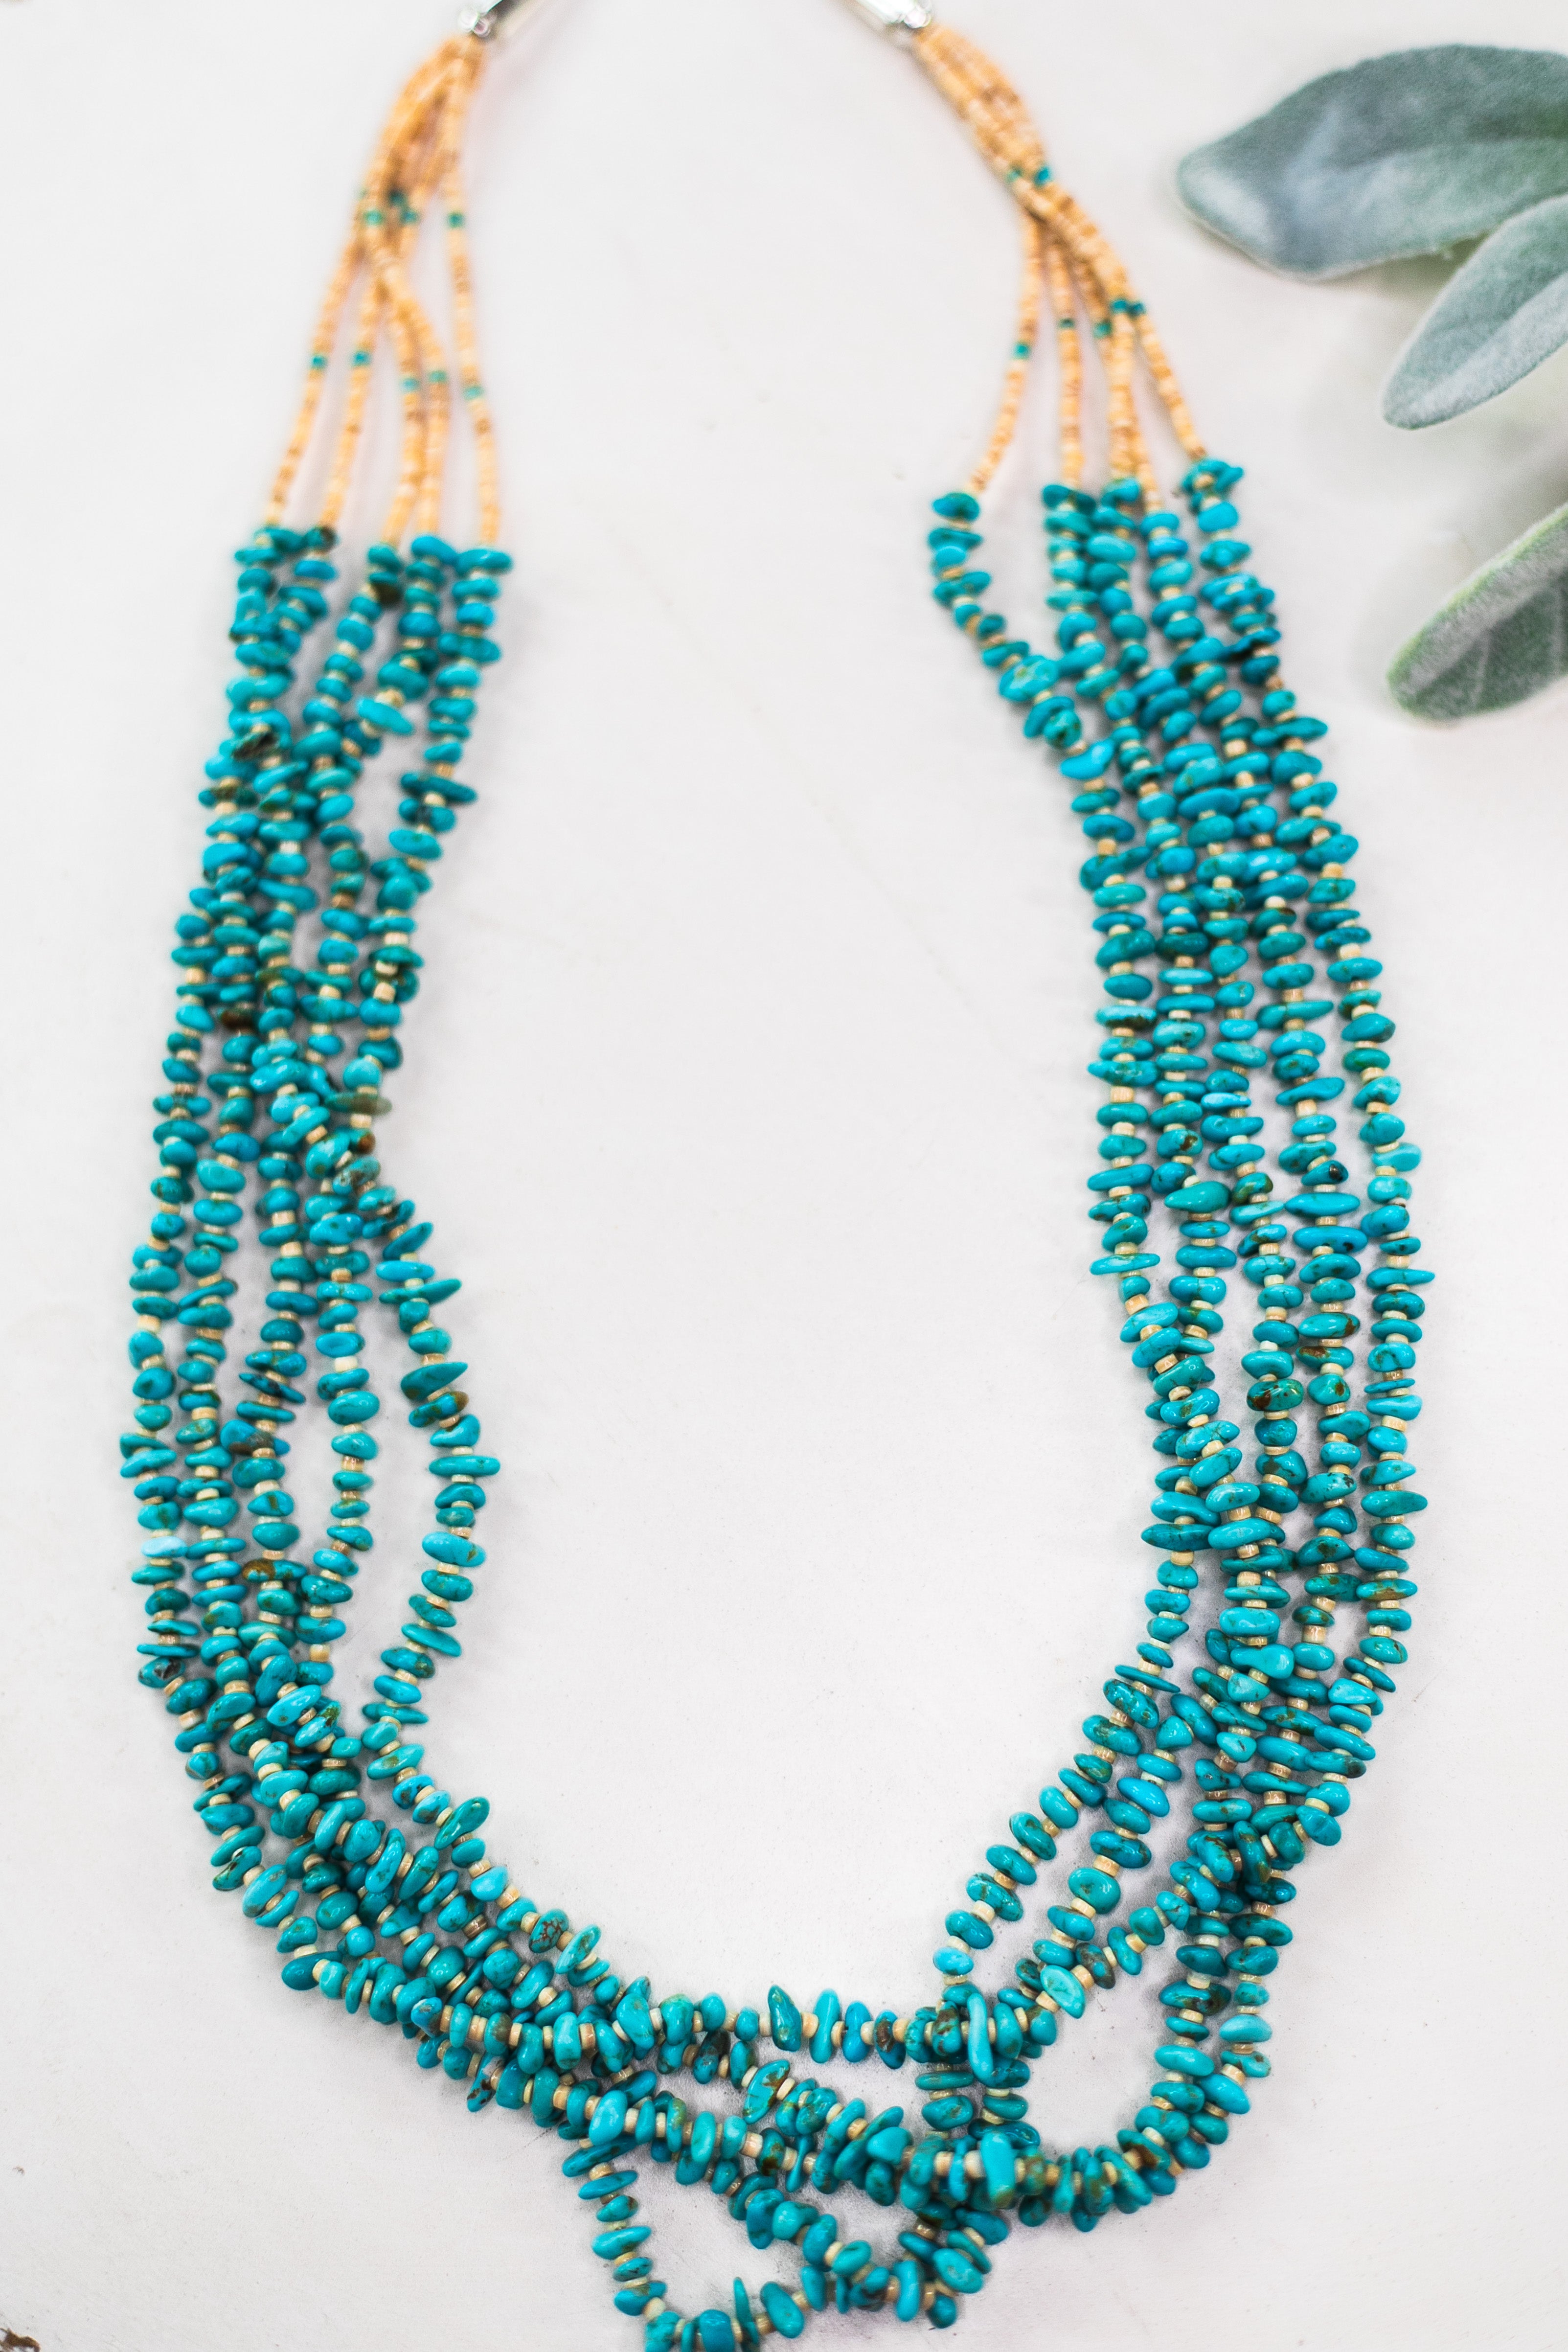 Navajo | Authentic Five Strand Turquoise and Heishi Necklace - Giddy Up Glamour Boutique